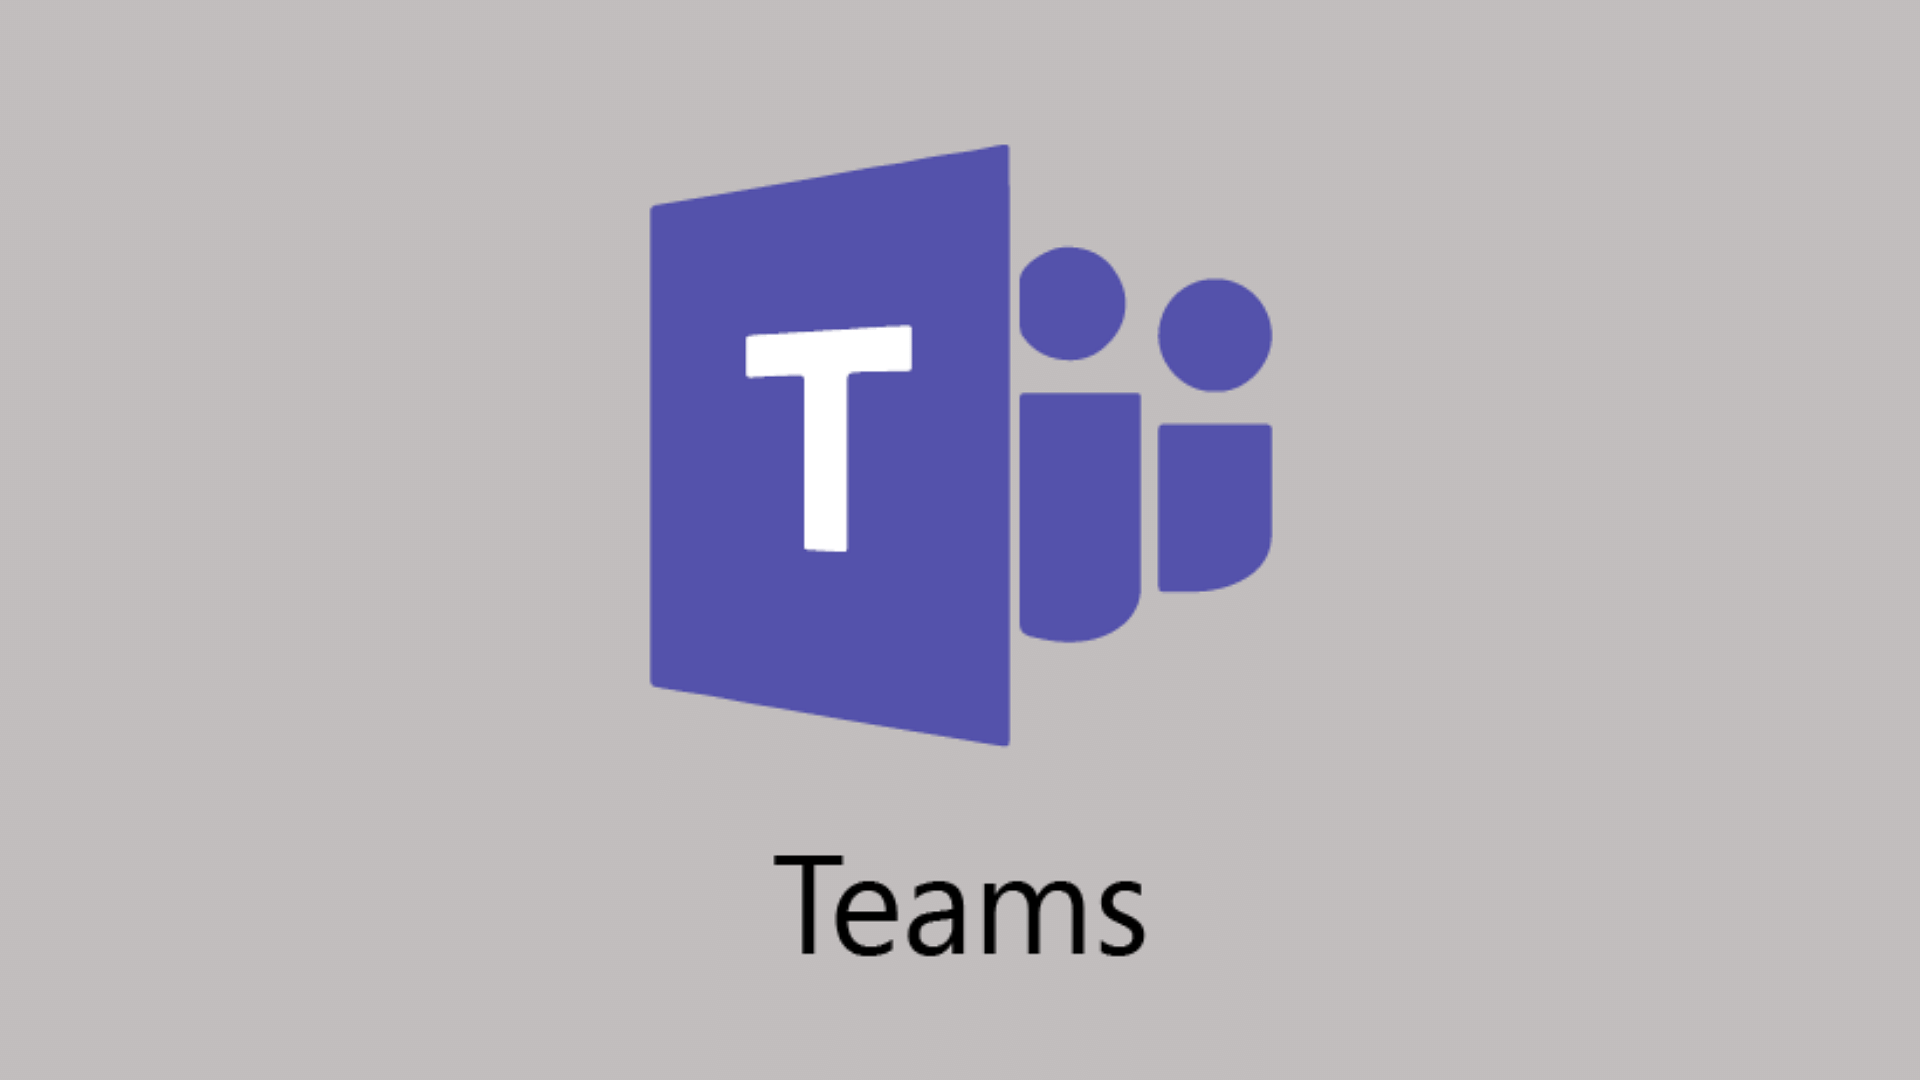 Microsoft Teams has over 44 million daily active users.